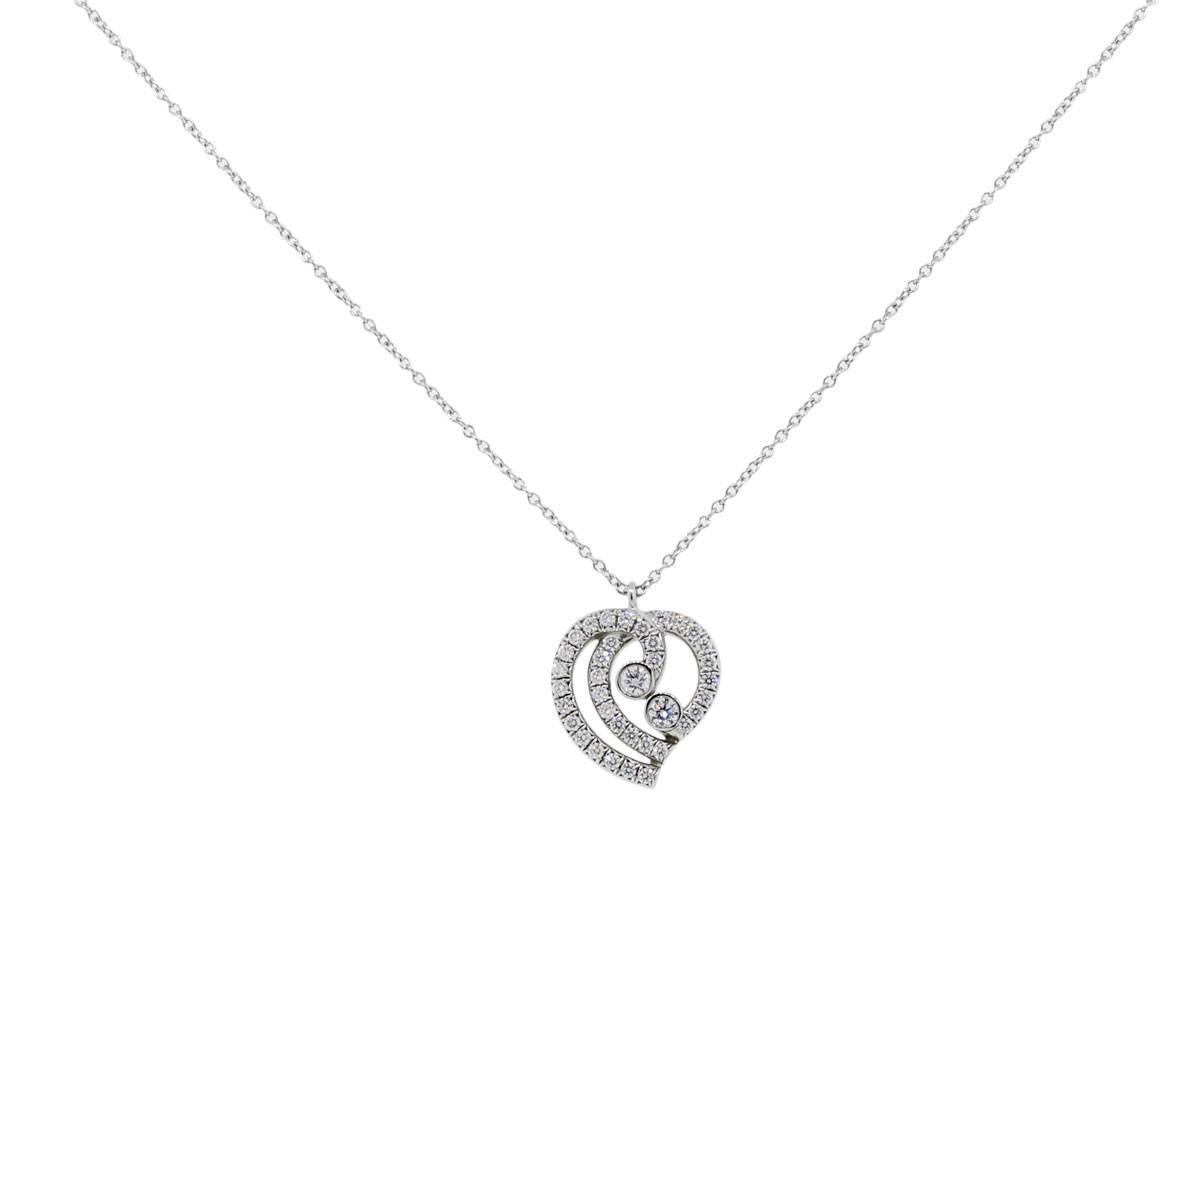 Style: Tiffany & Co. Platinum Diamond Heart Pendant Necklace
Length: Necklace is 16